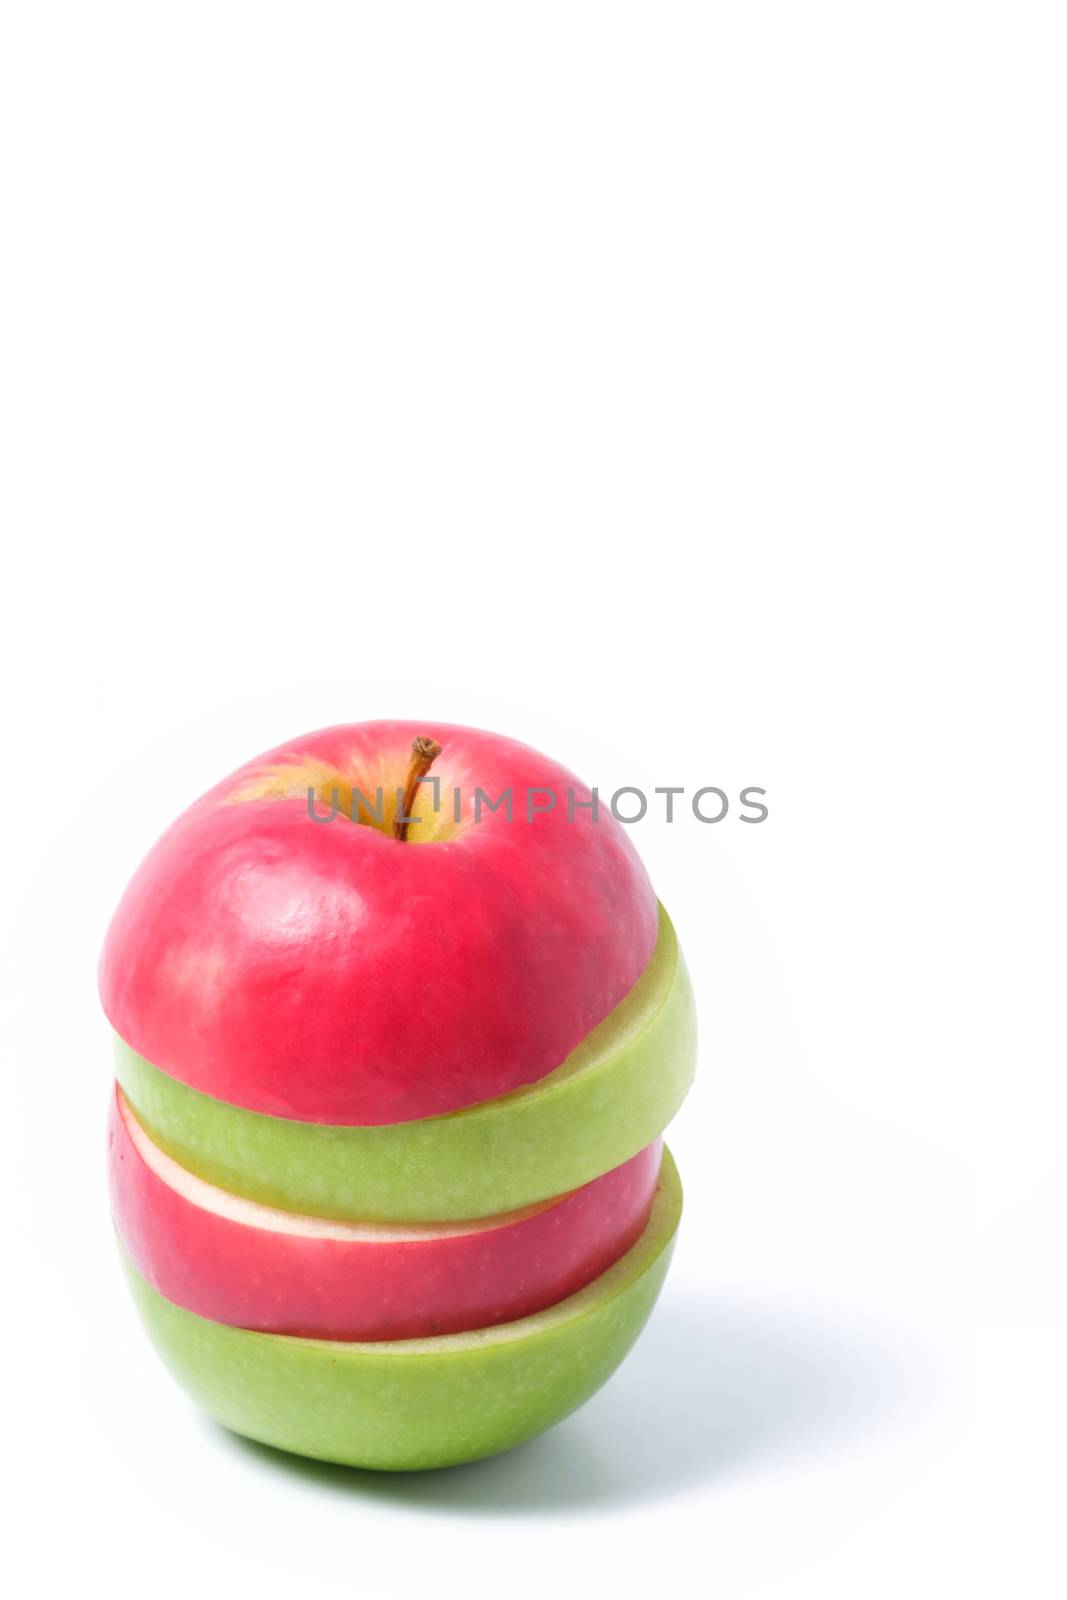 Slice red and green apples by zneb076